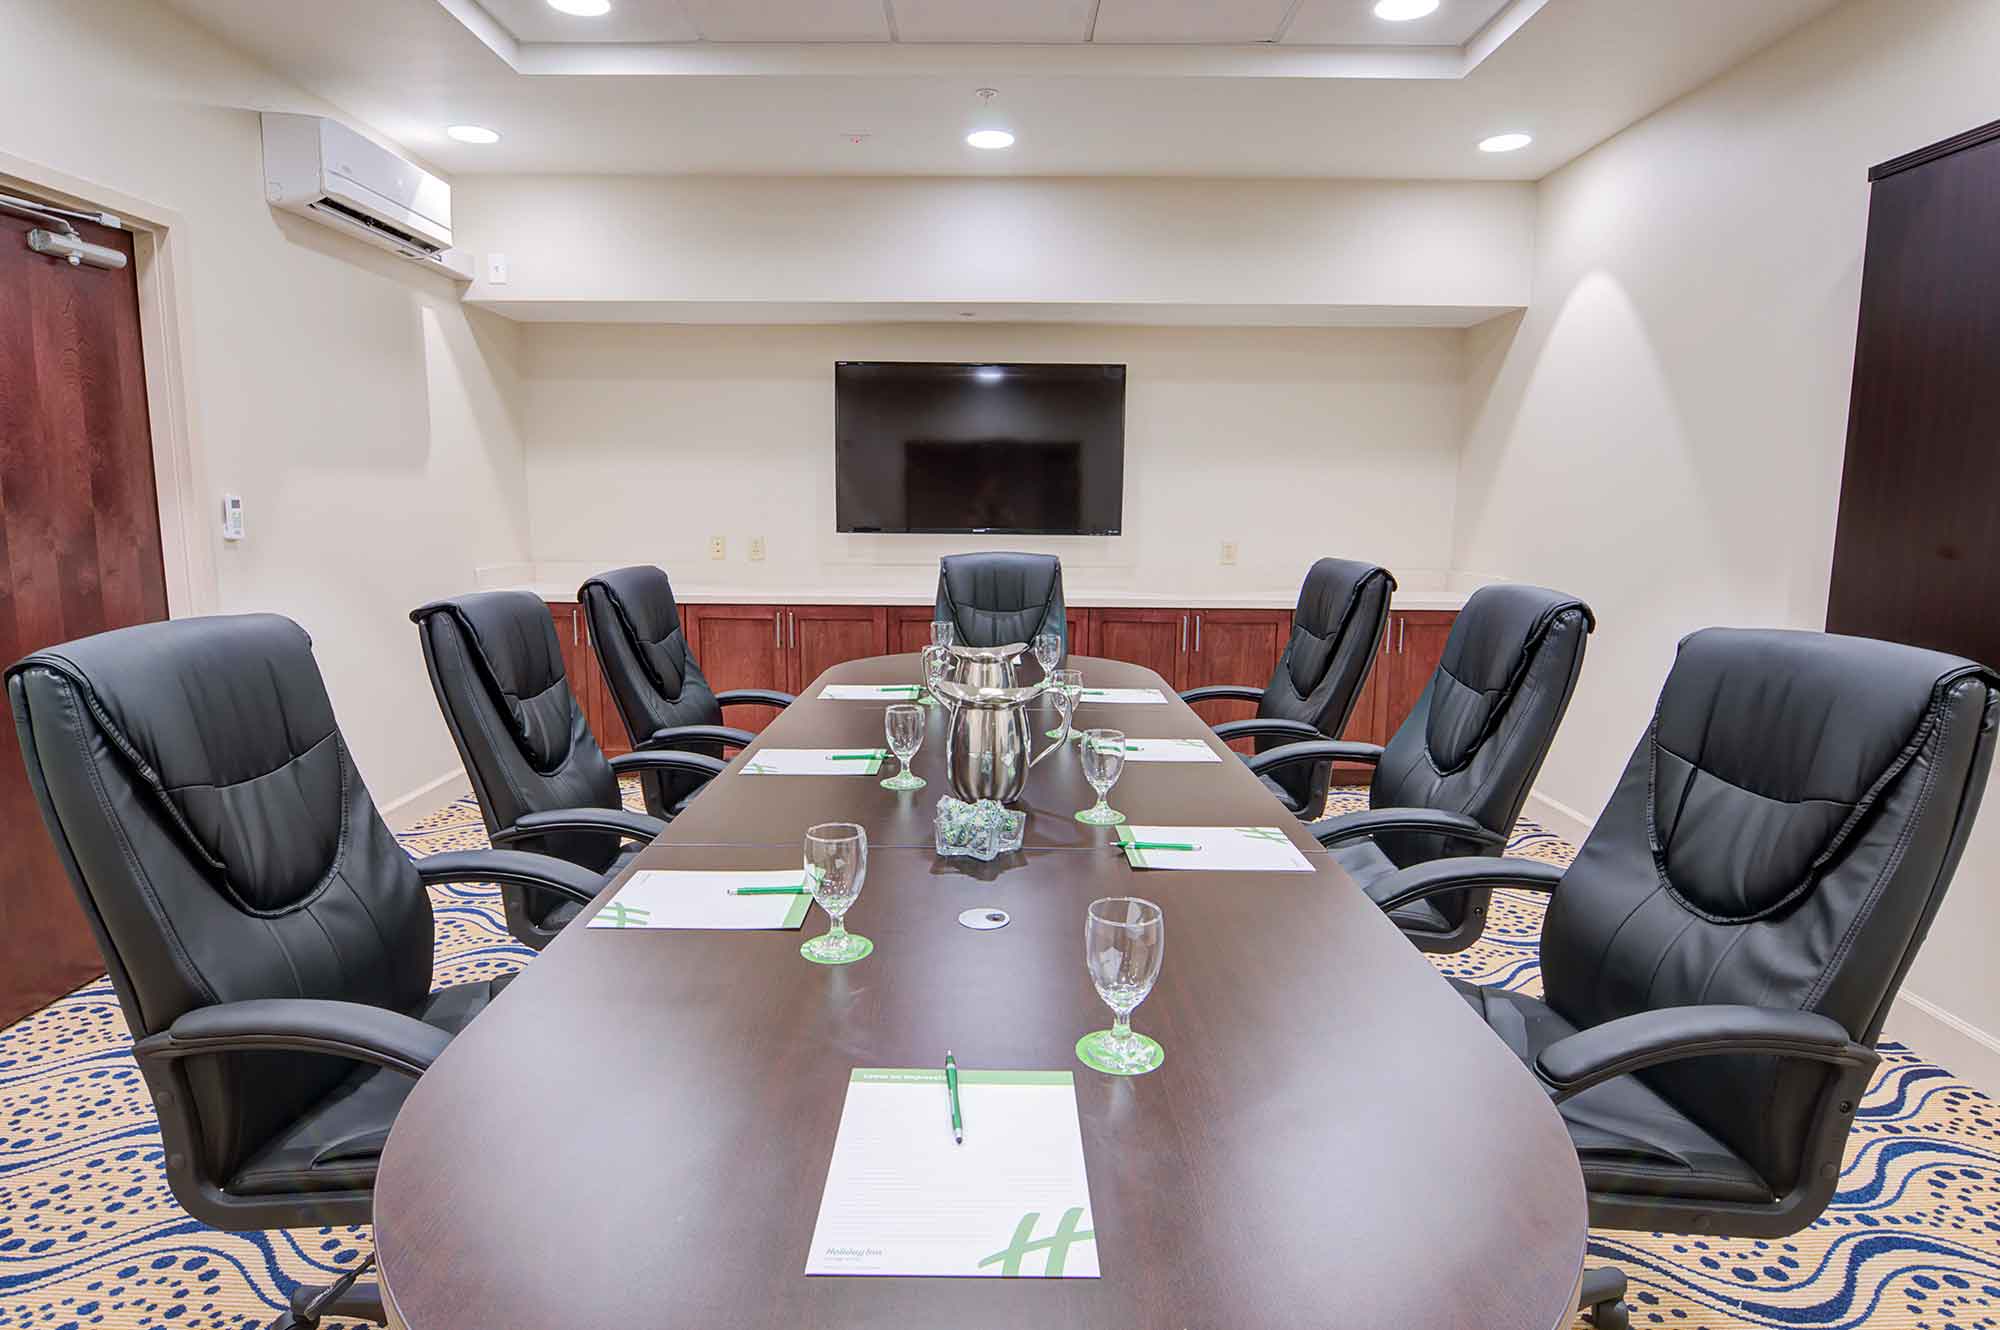 Conference Center for smaller business gatherings, parties, events and more